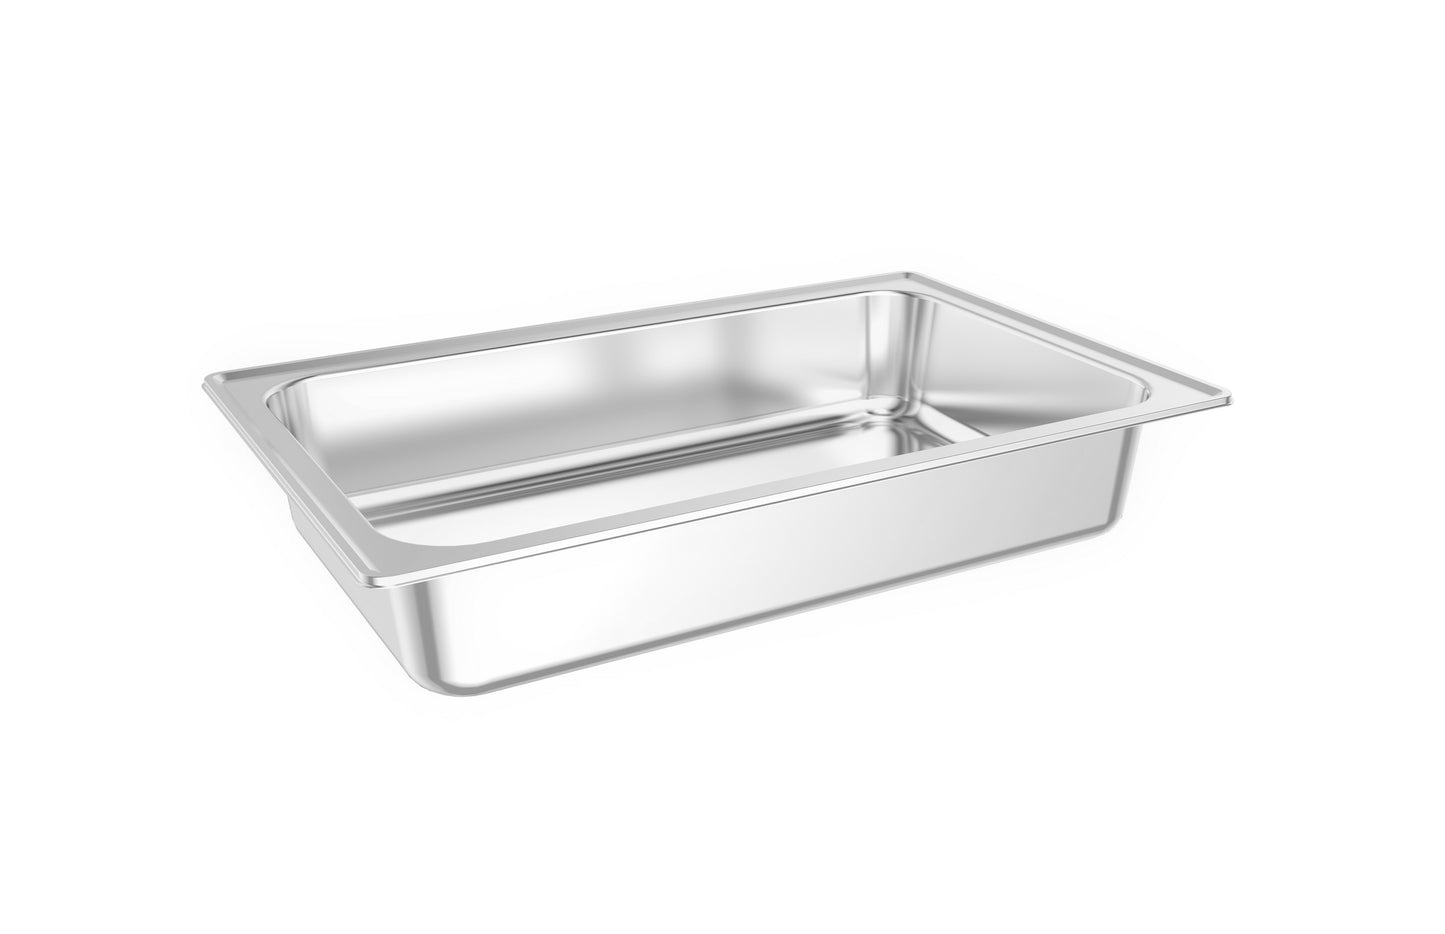 CHAFING DISH 9L - 2 KAMBERG® COMPARTMENTS